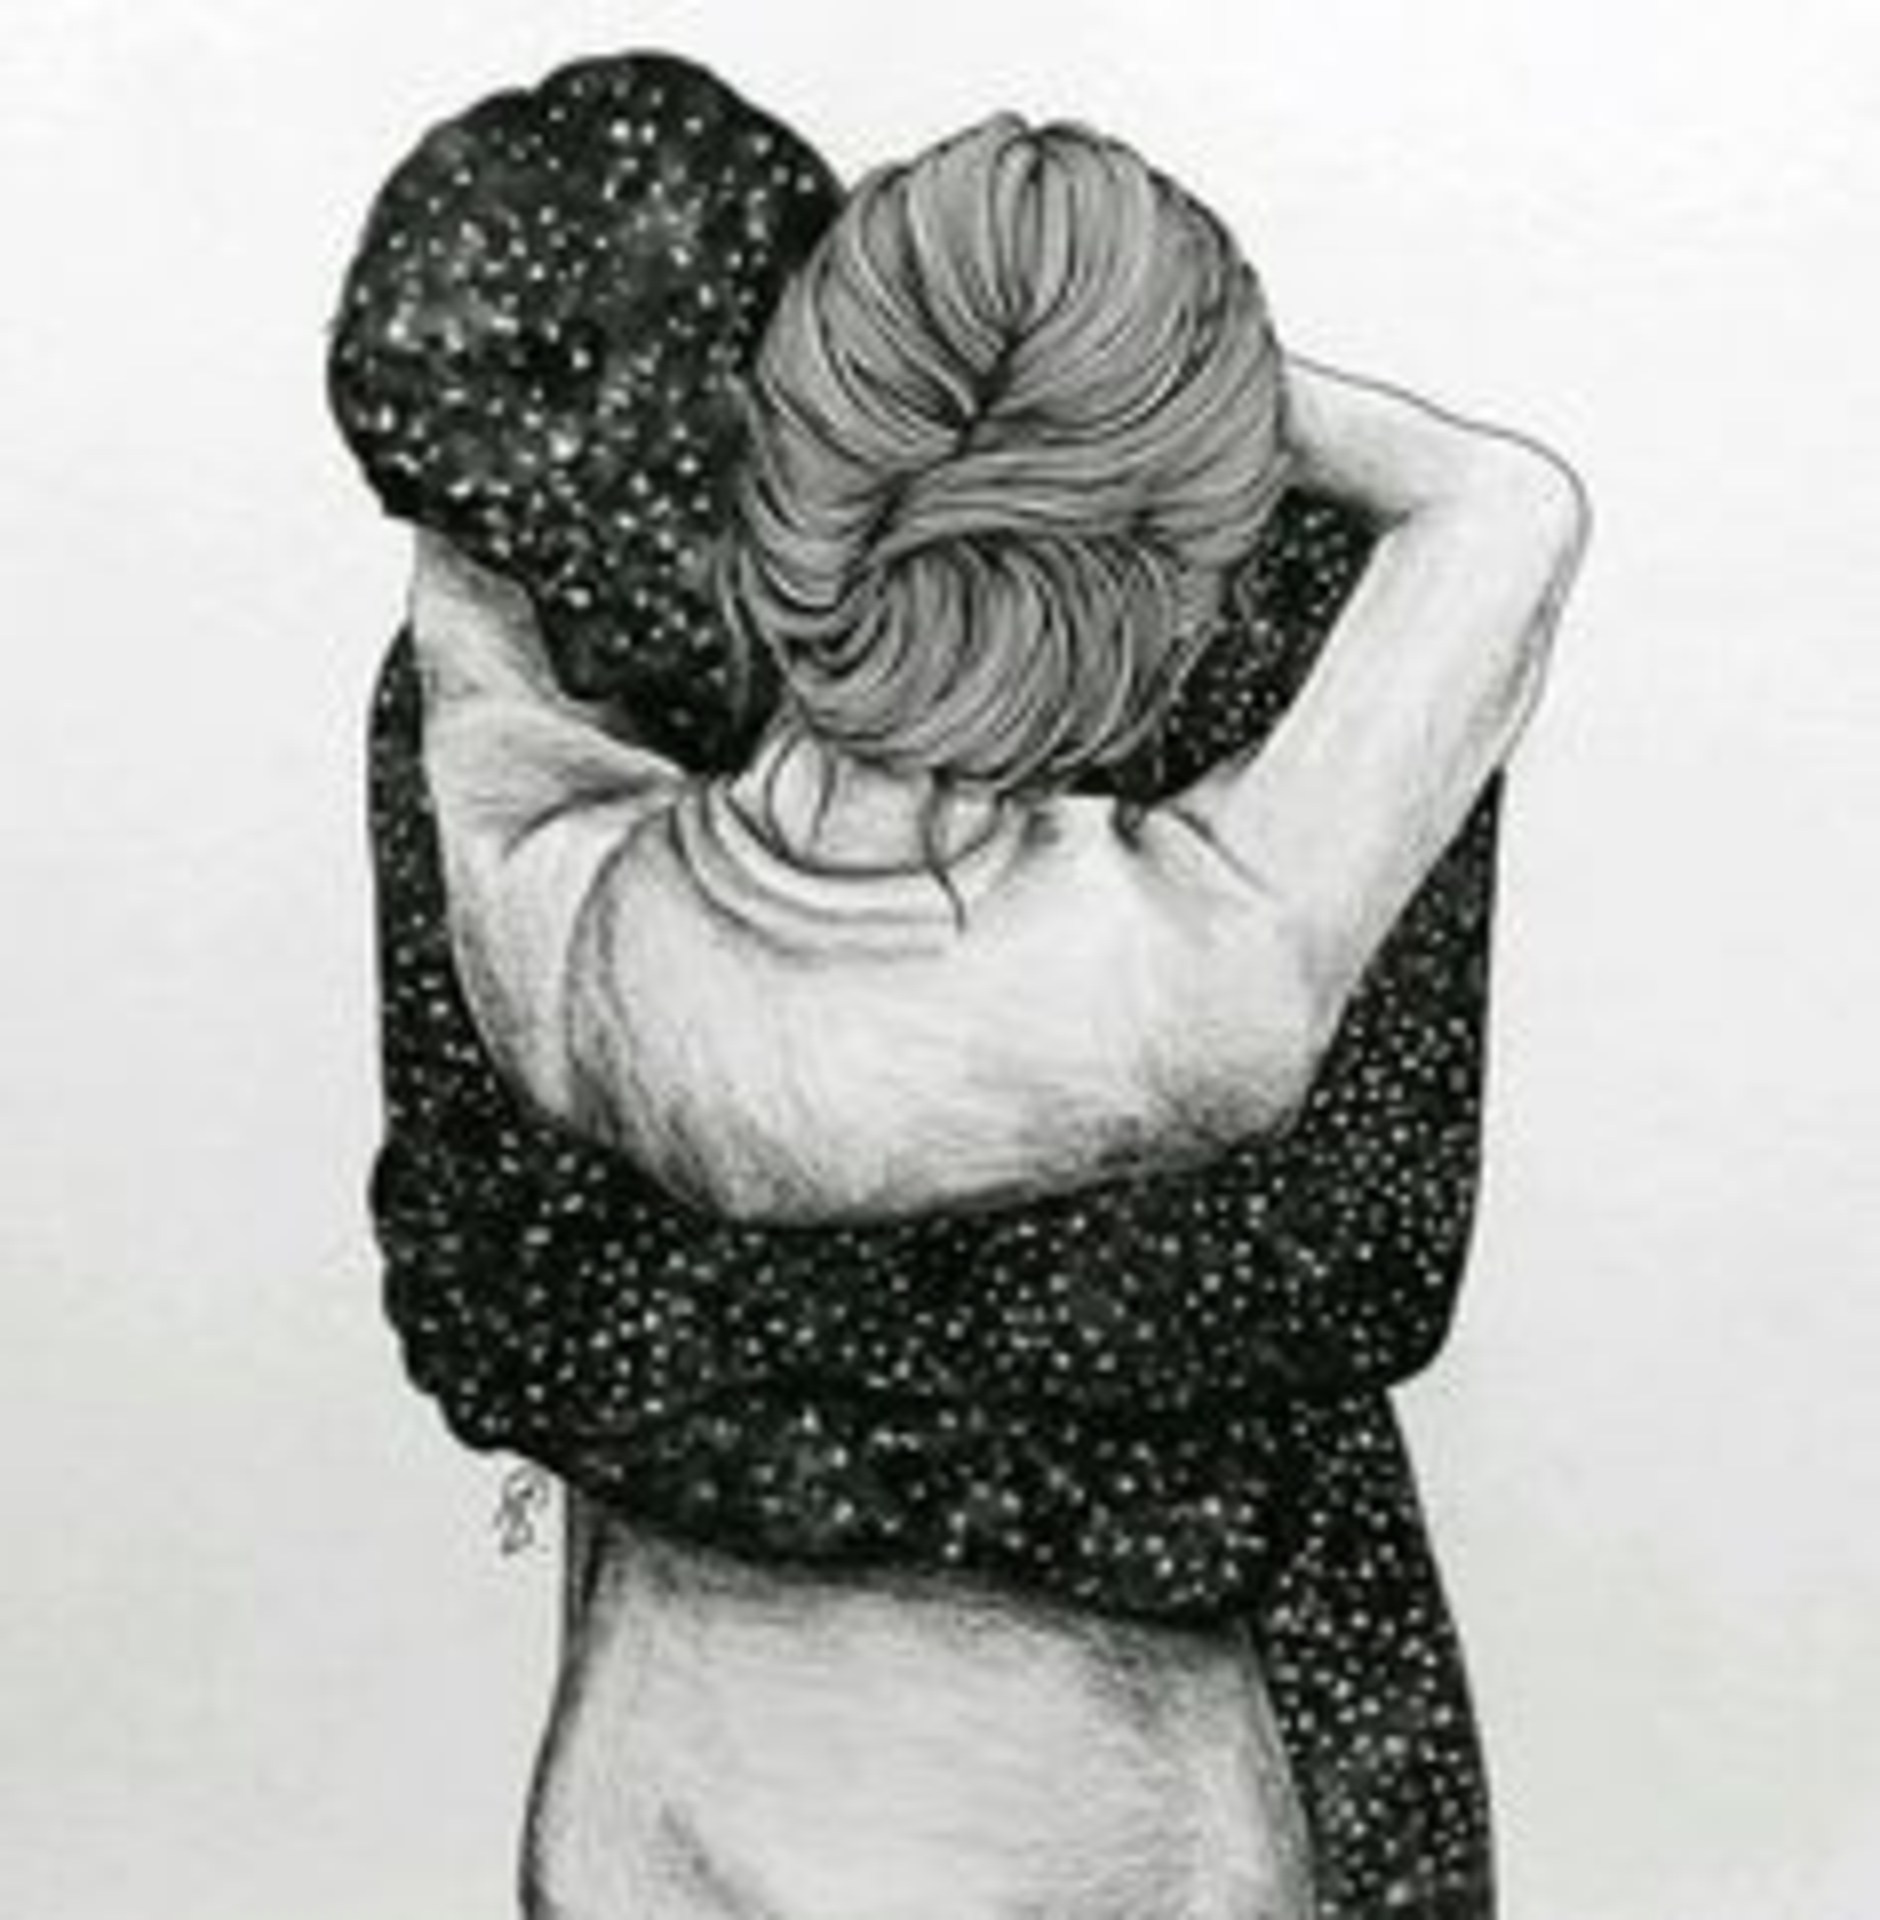 Couple Breaking Up Drawing - HD Wallpaper 